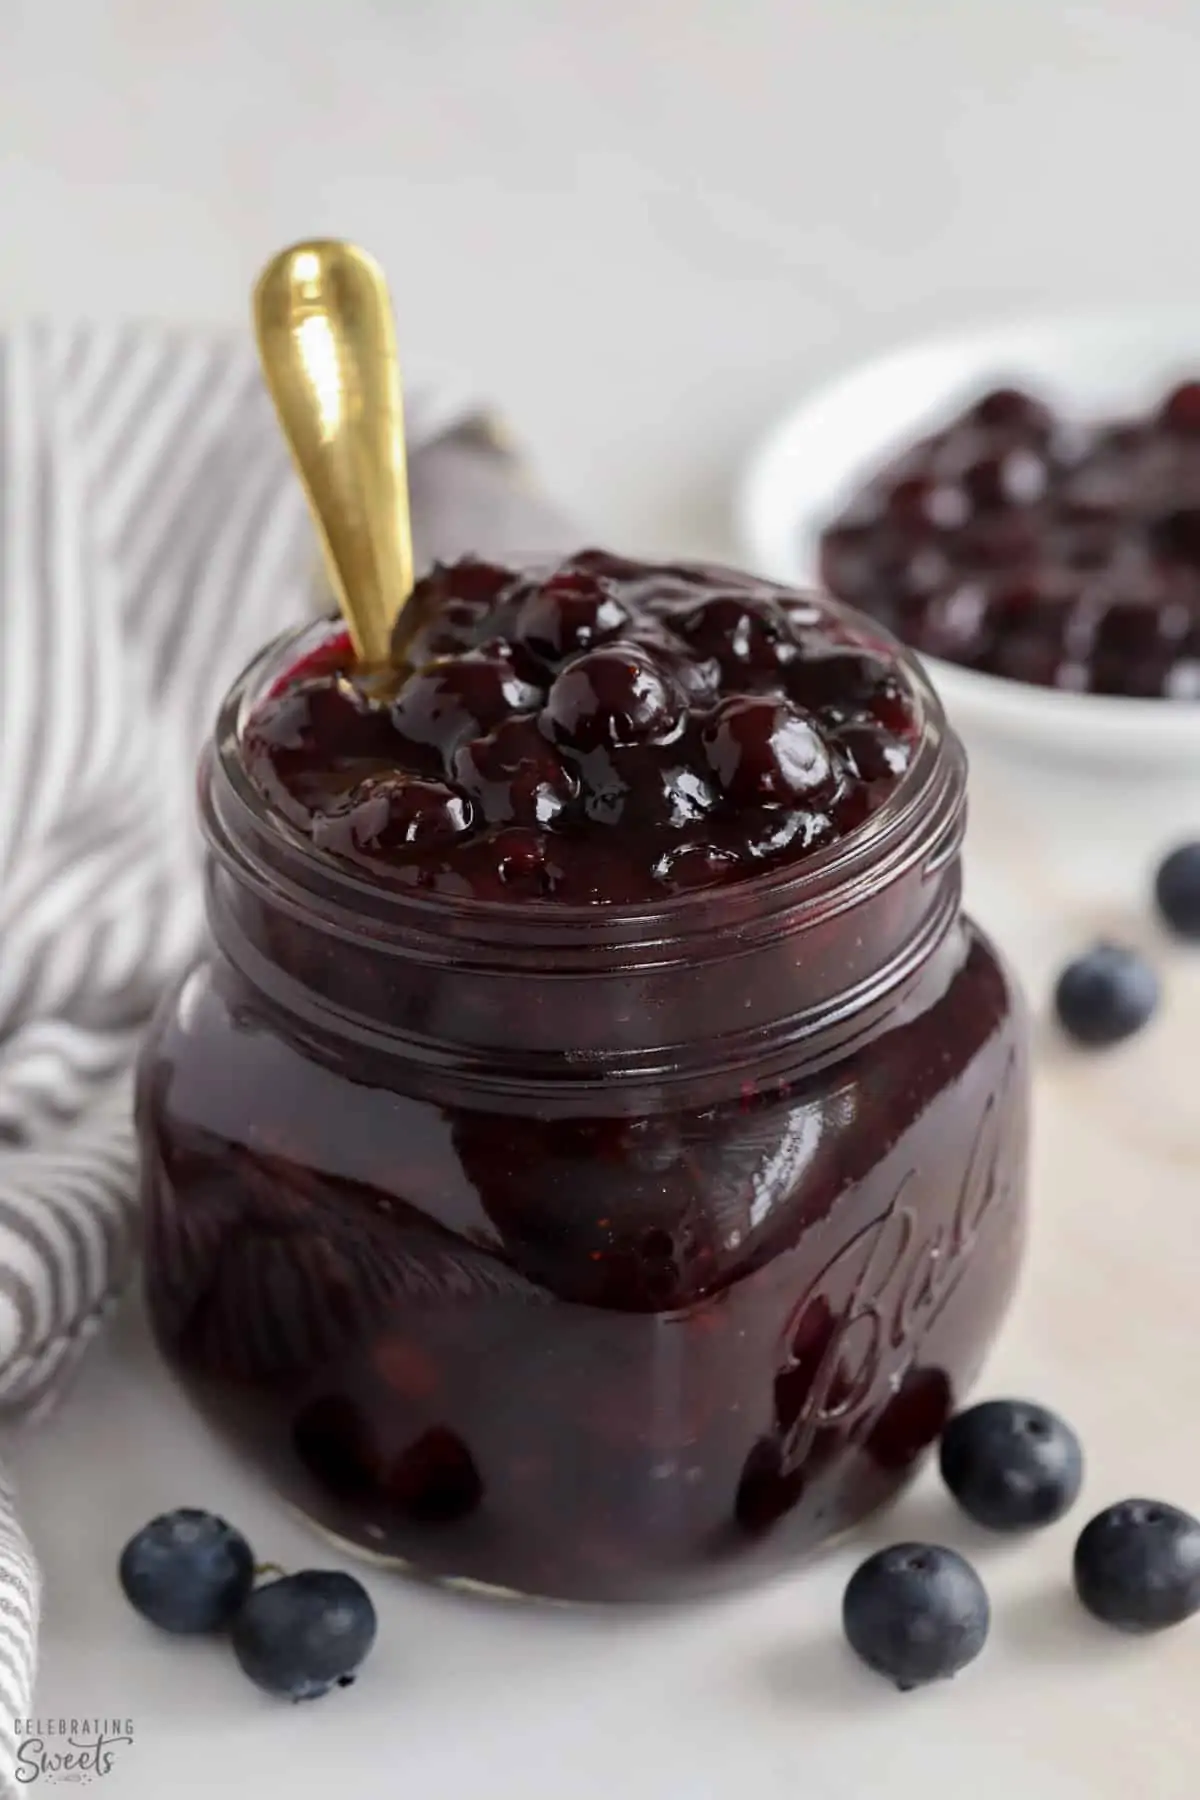 Blueberry Pie Filling in a glass jar with a gold spoon.